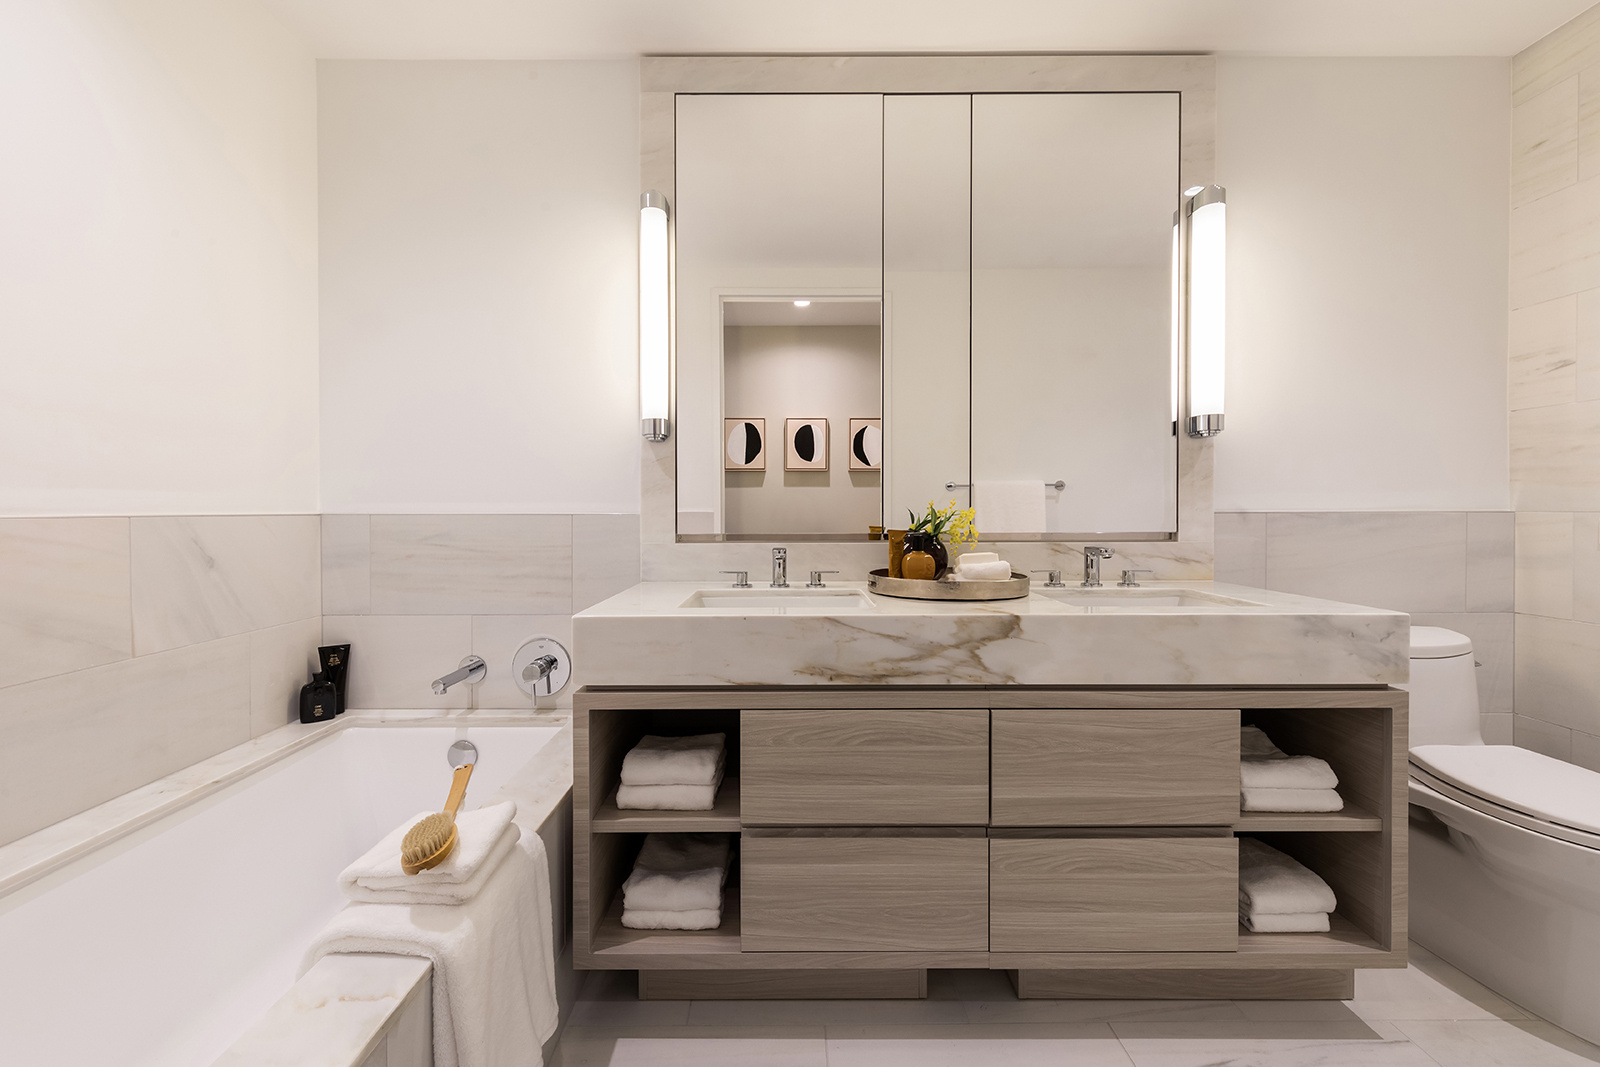 A modern bathroom featuring a large mirror, dual sinks, wooden vanity, white towels, and a bathtub.